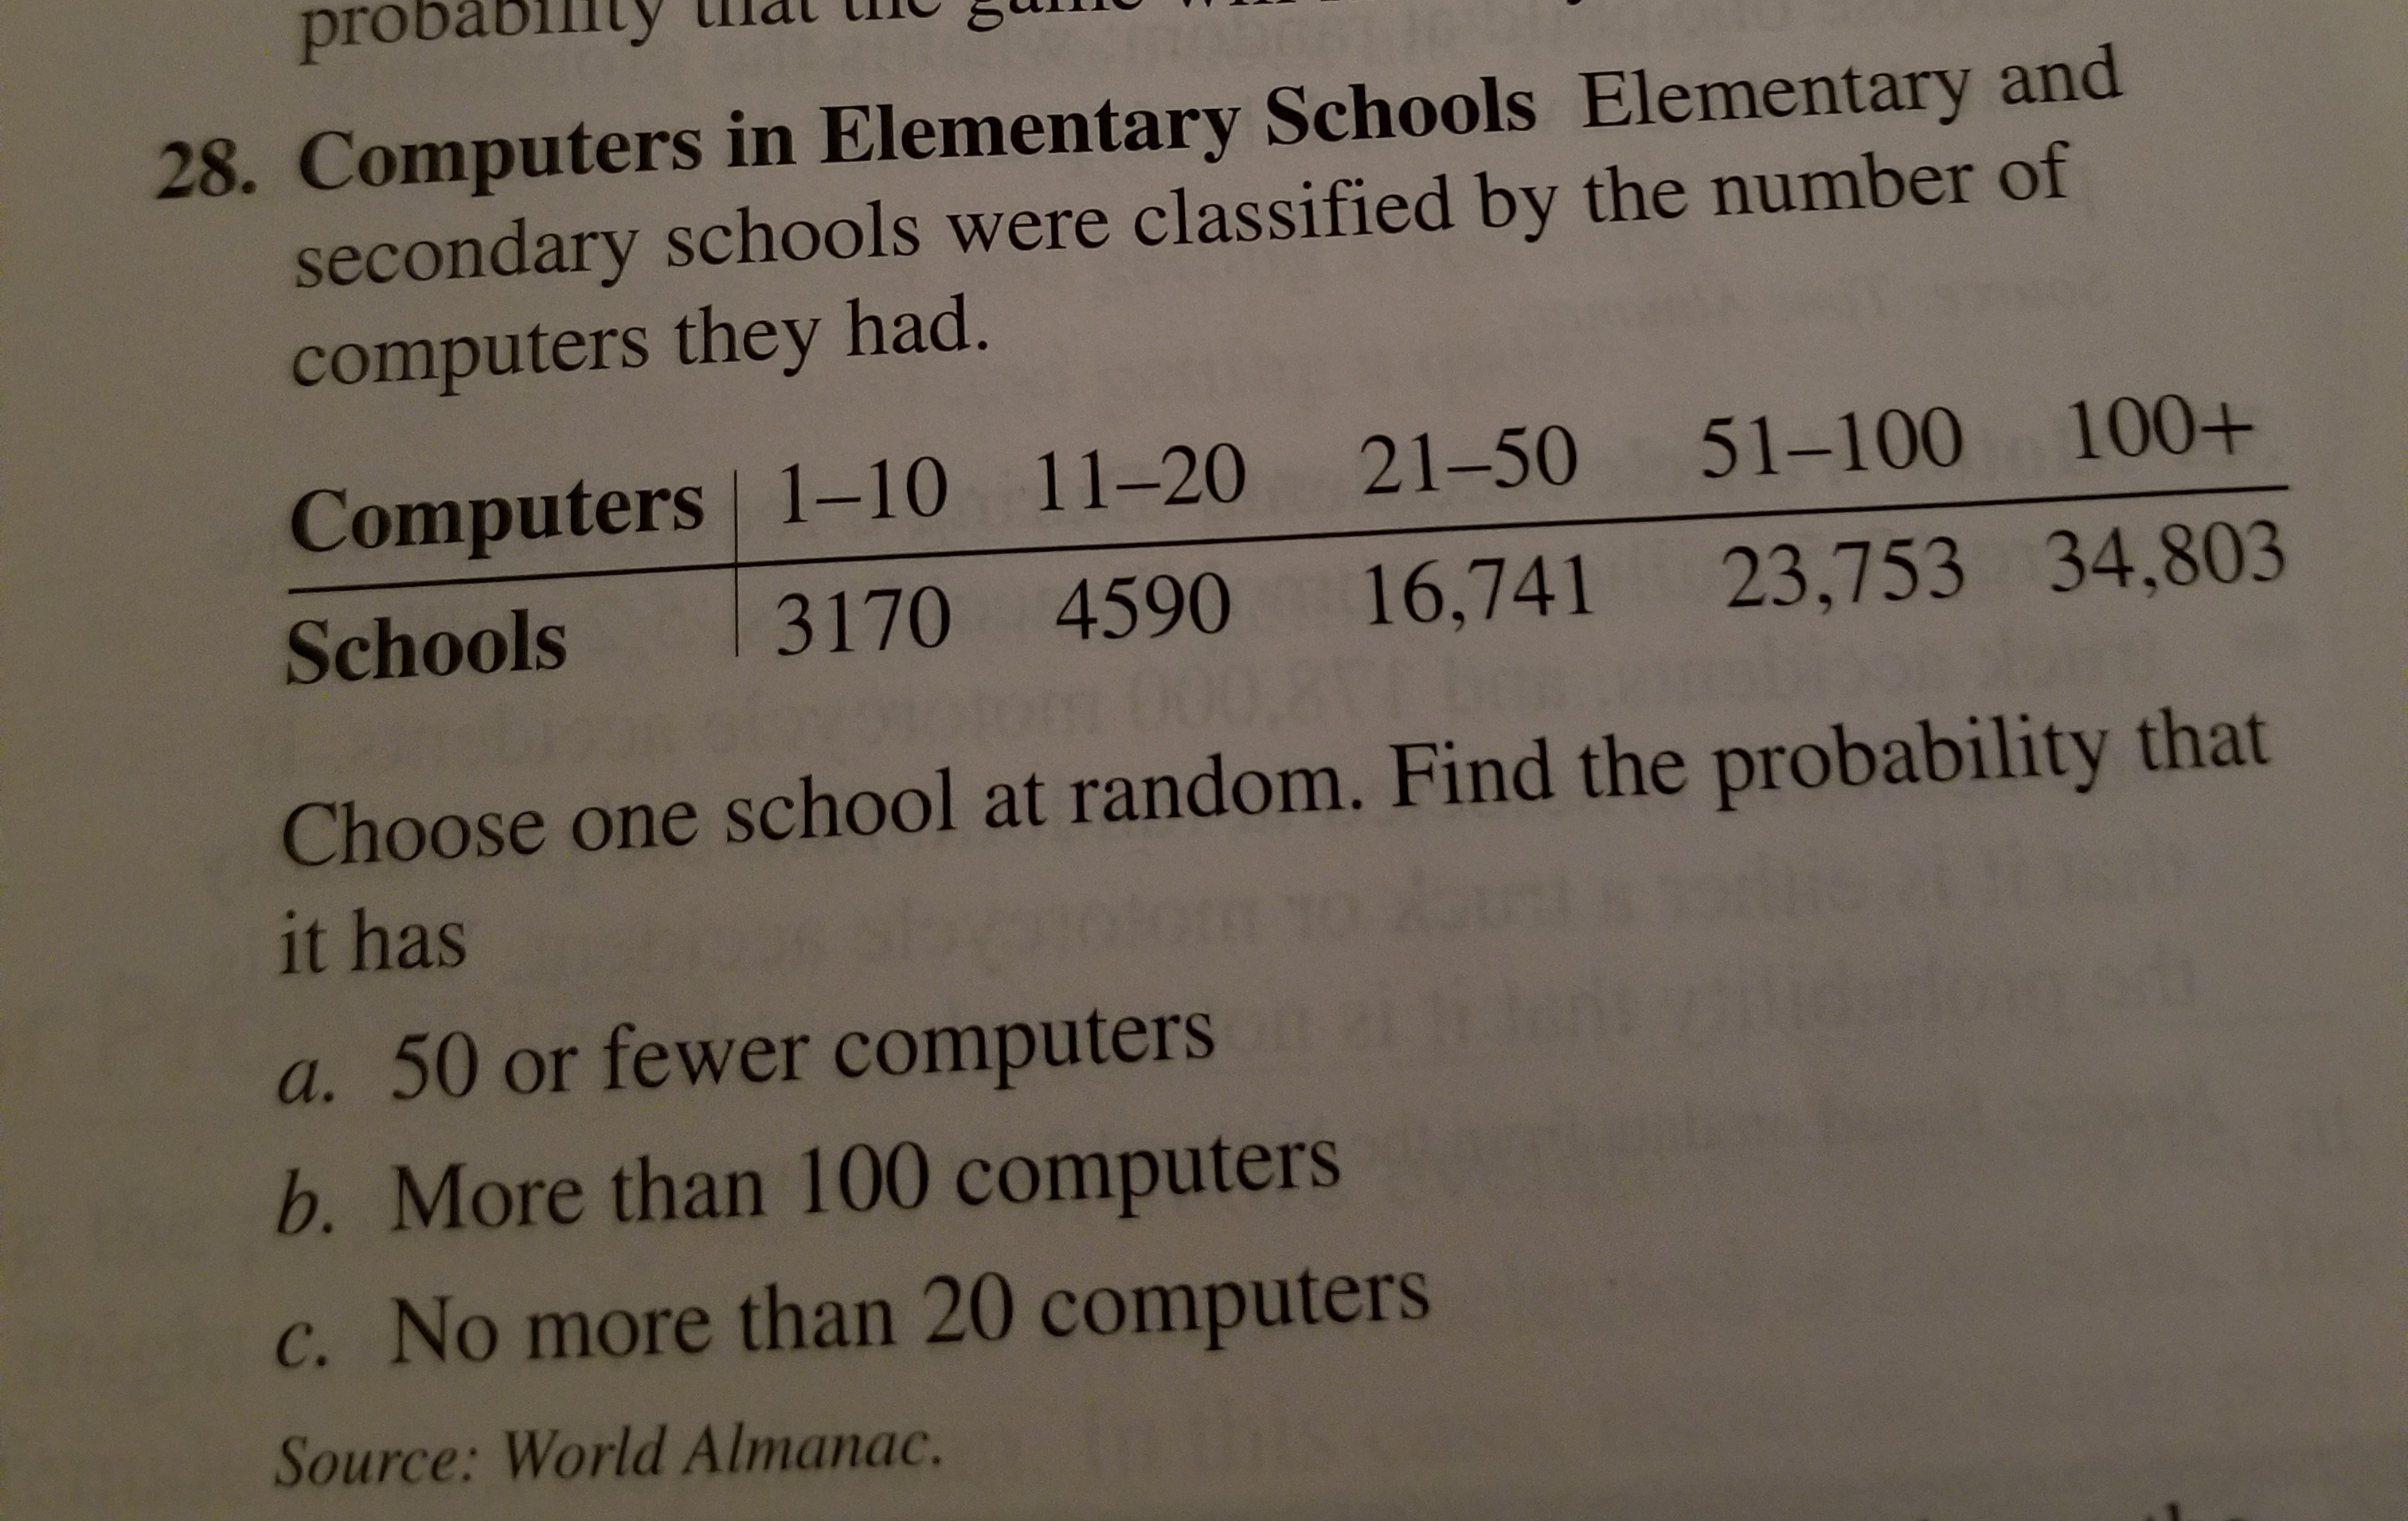 probability
28. Computers in Elementary Schools Elementary and
secondary schools were classified by the number of
computers they had.
Computers 1–10 11–20 21-50 51–100 100+
16,741 23,753 34,803
3170 4590
Schools
om 000,8
Choose one school at random. Find the probability that
it has
a. 50 or fewer computers
b. More than 100 computers
c. No more than 20 computers
Source: World Almanac.
